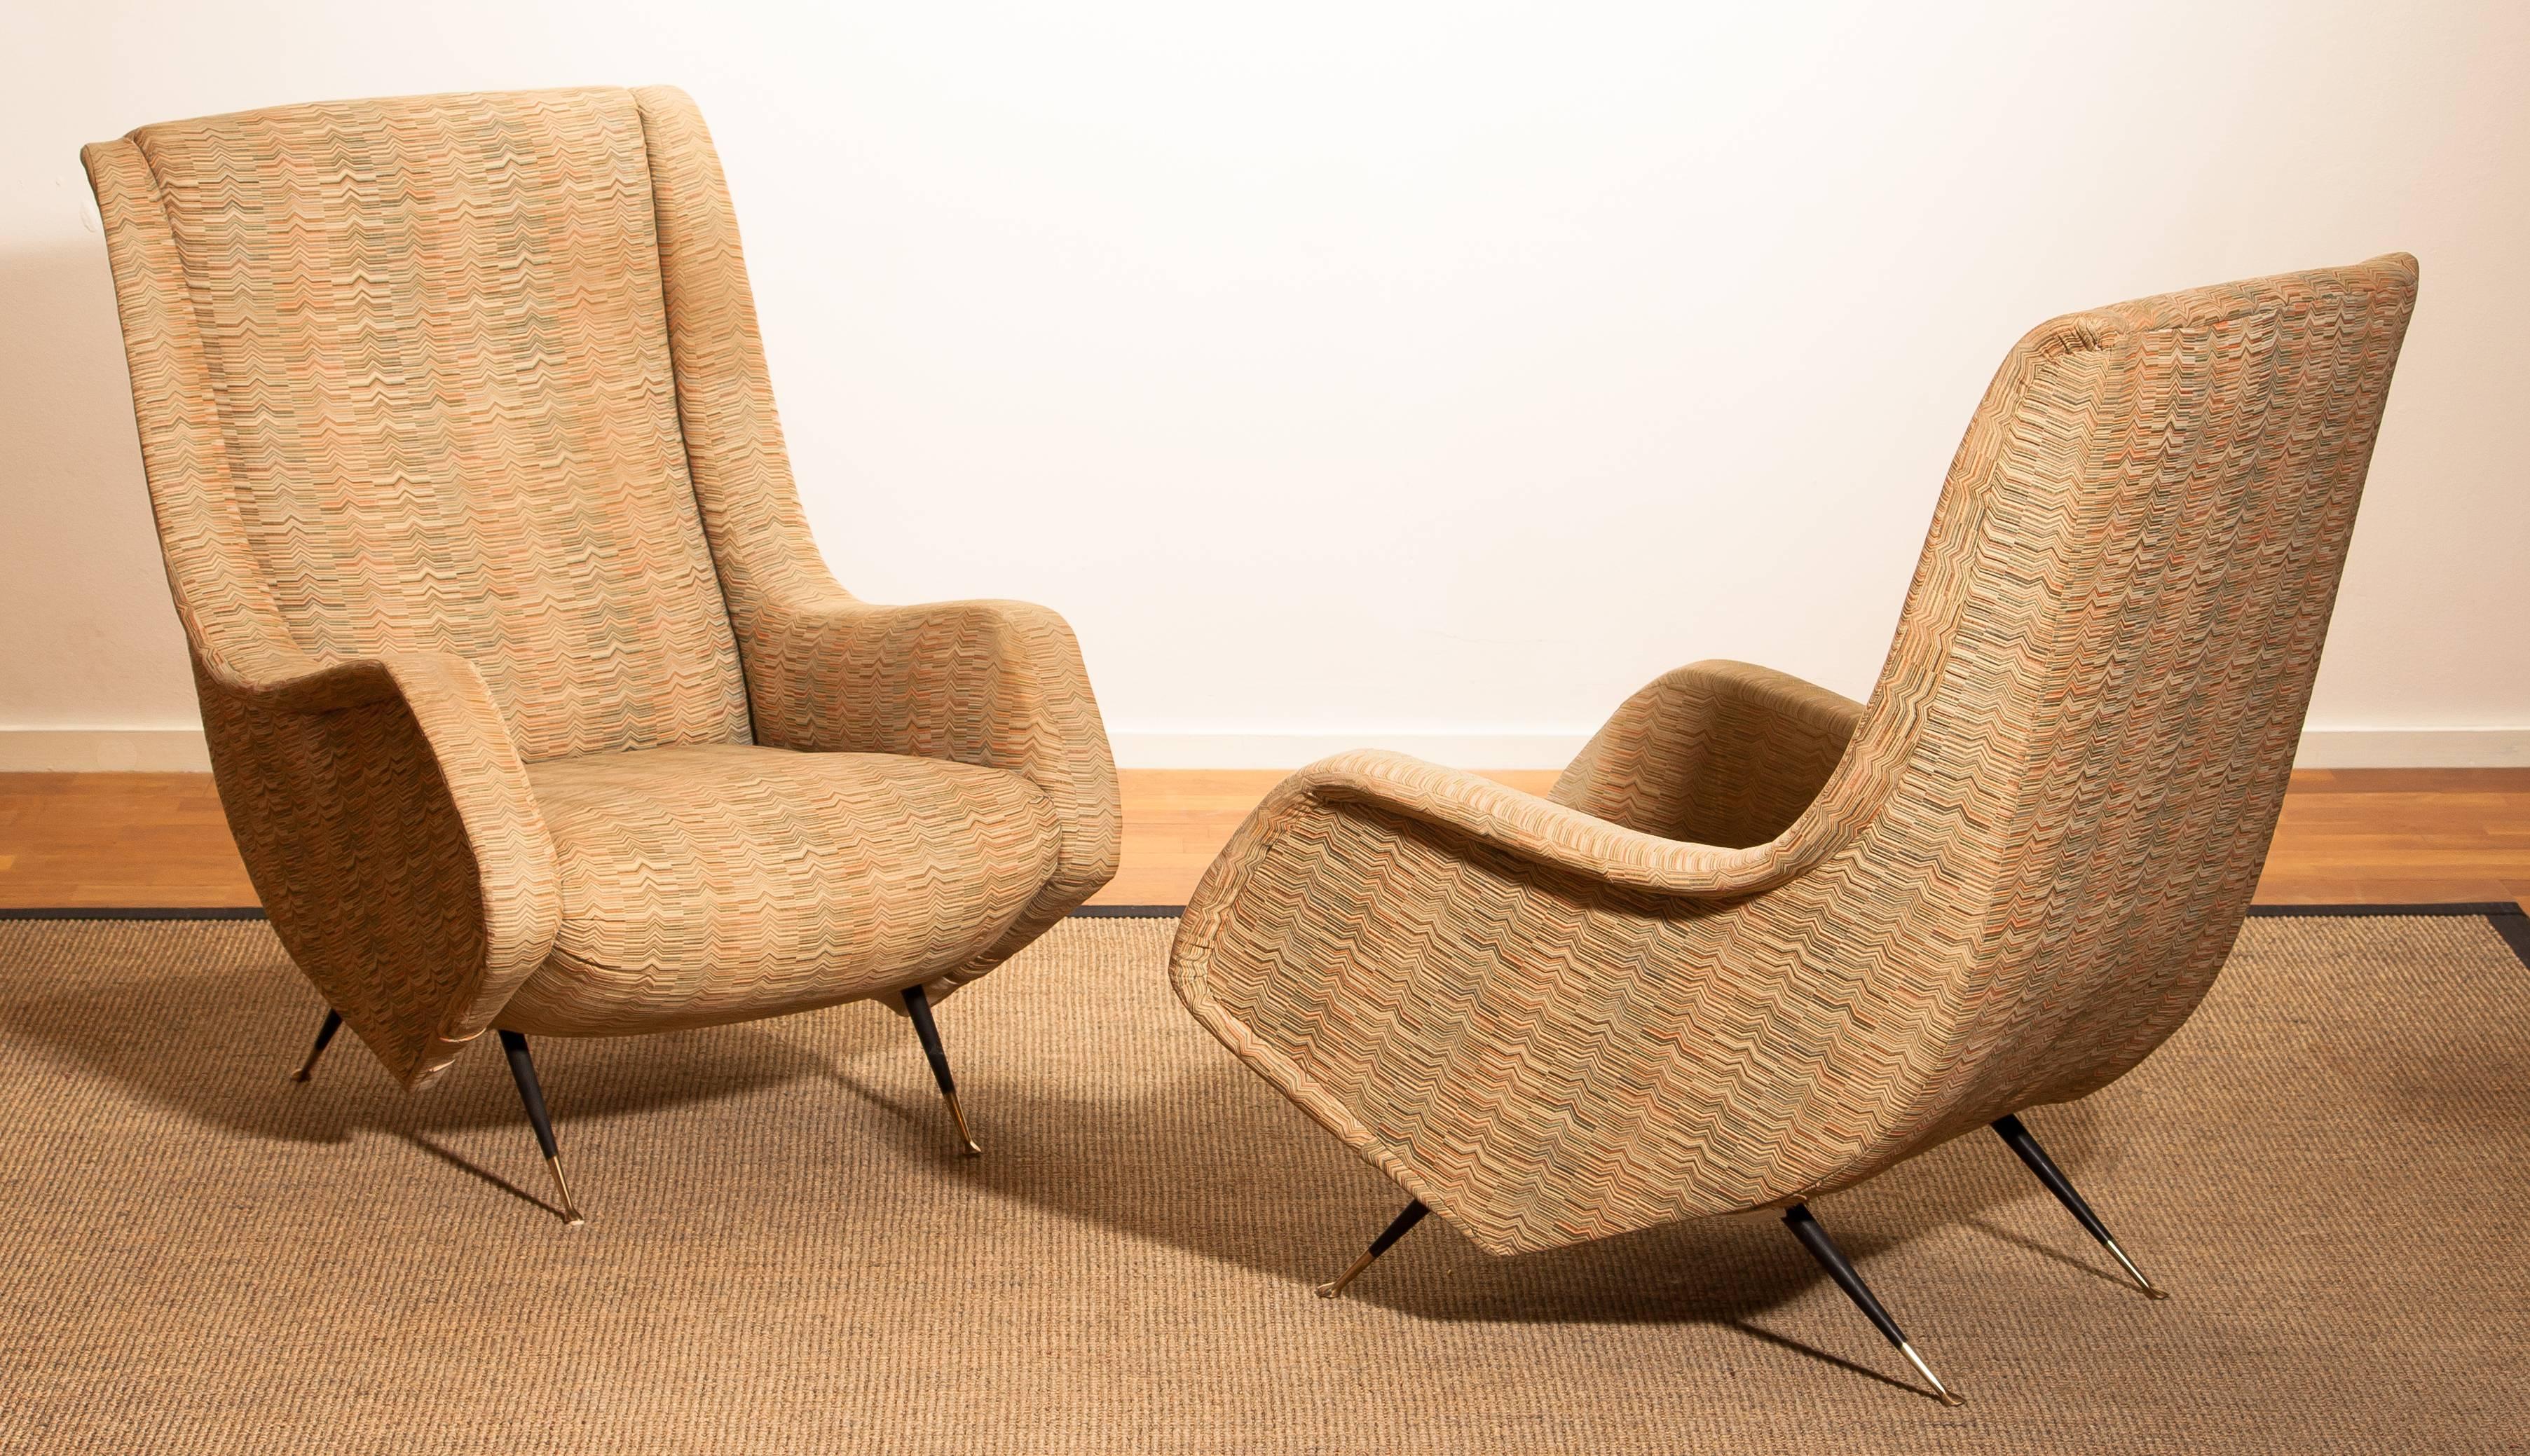 Mid-20th Century Set of Two Original Easy Chairs from the 1950s by Aldo Morbelli for Isa Bergamo